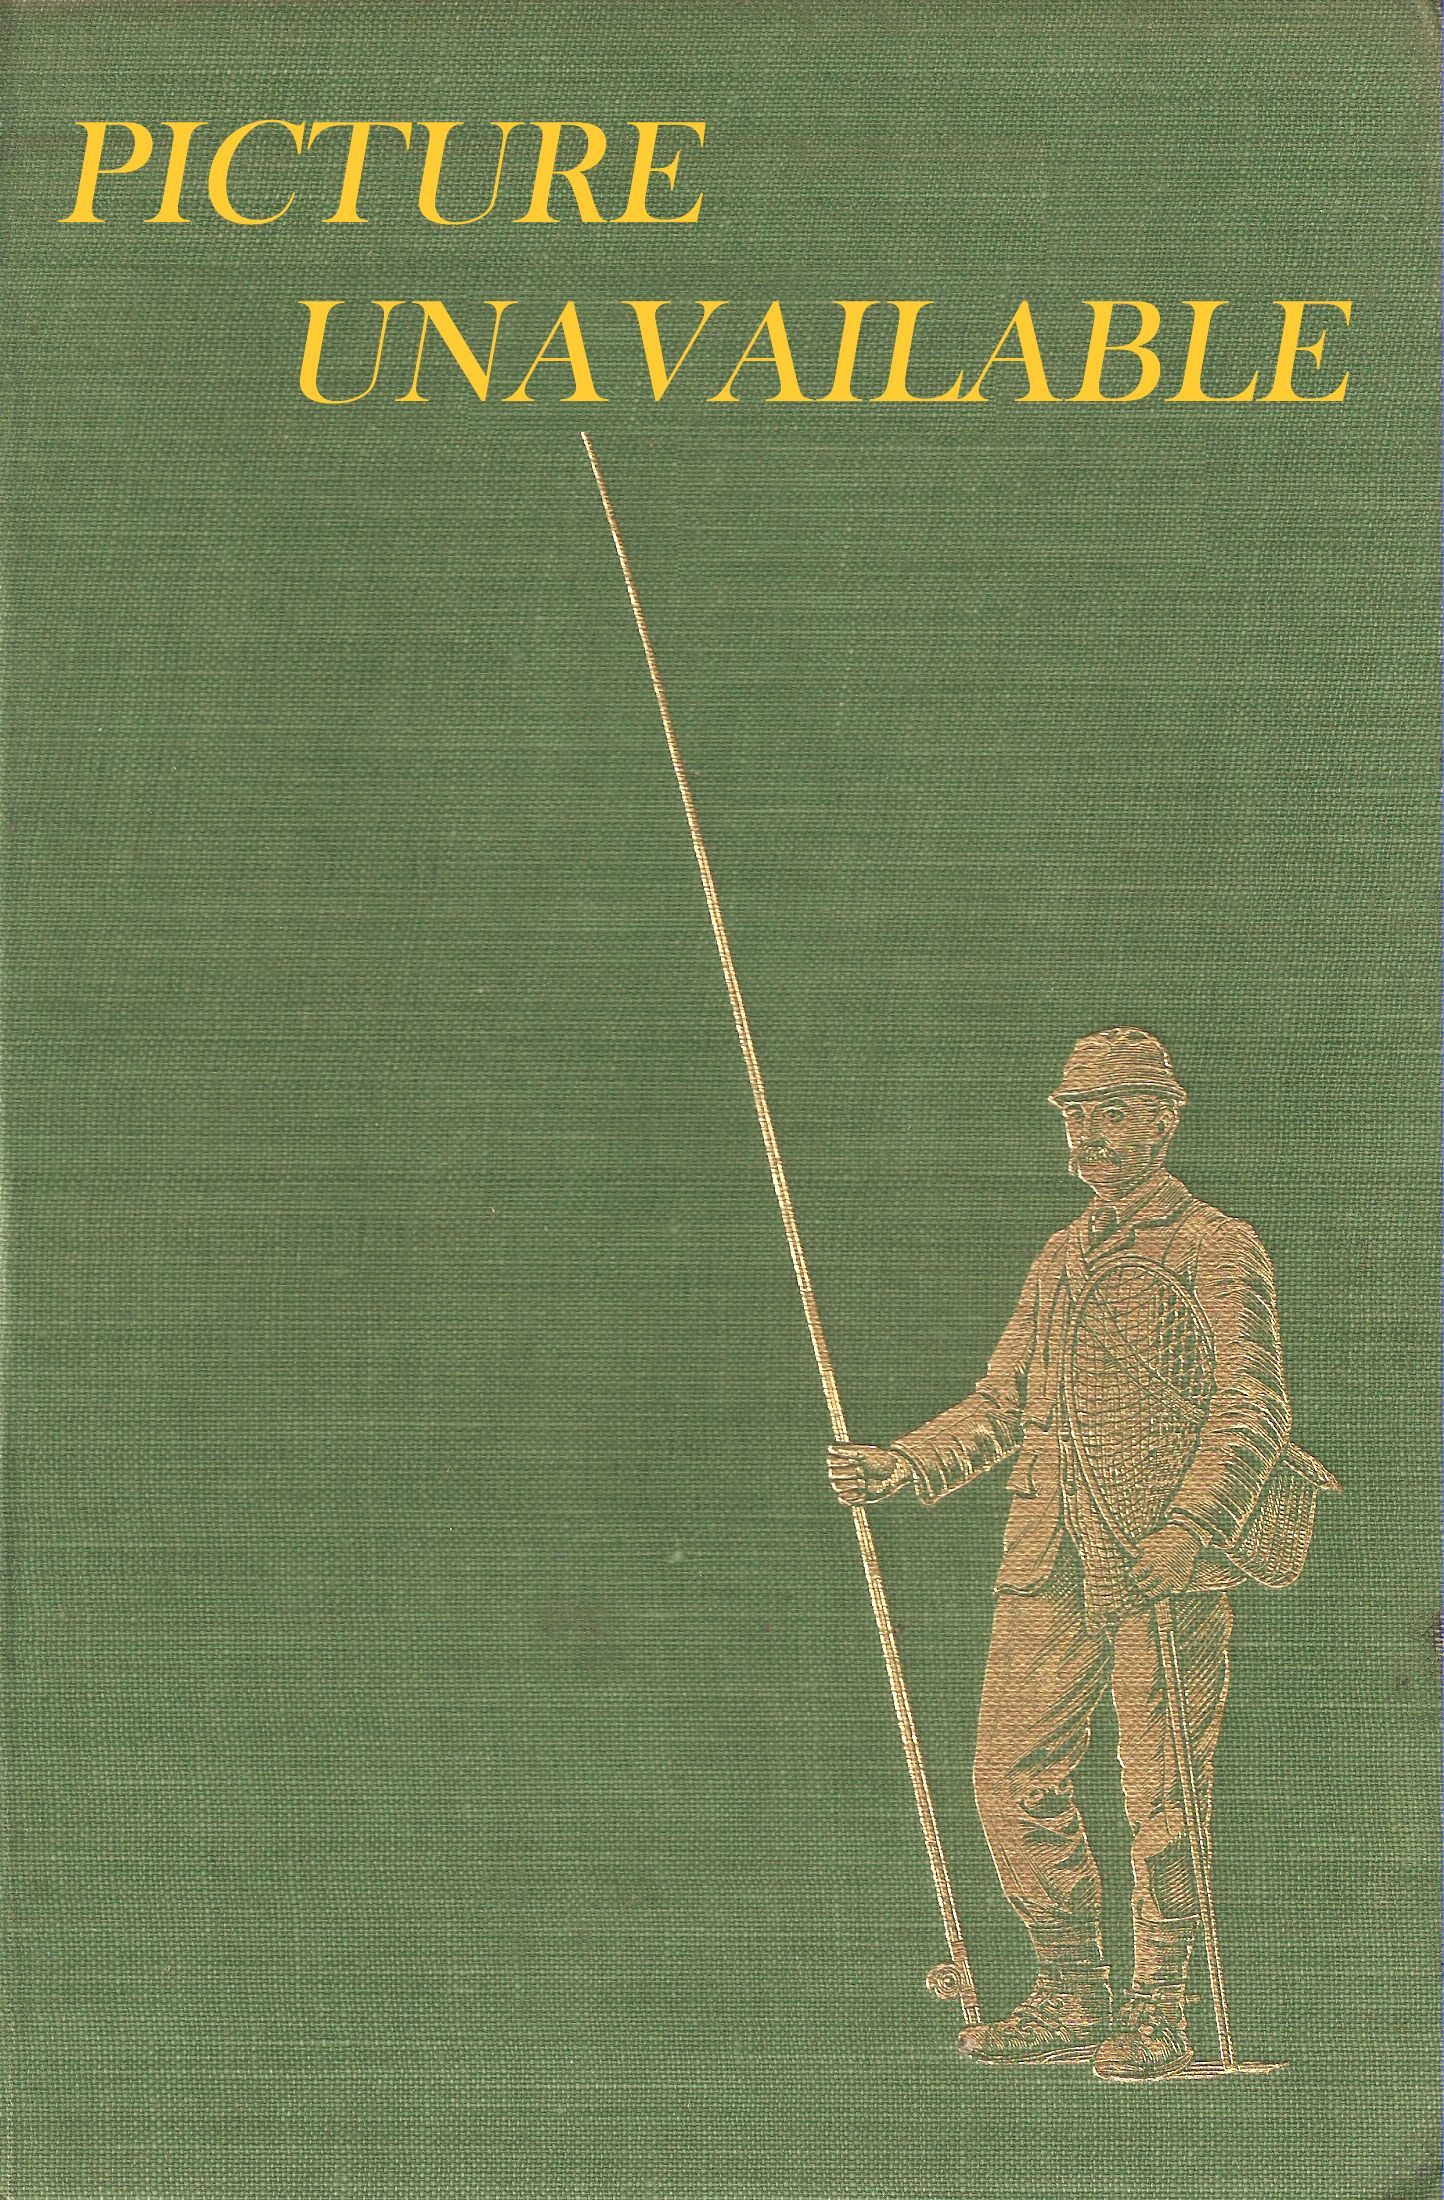 ARMCHAIR ADVENTURES FOR THE ANGLER. Edited by Charles K. Fox.